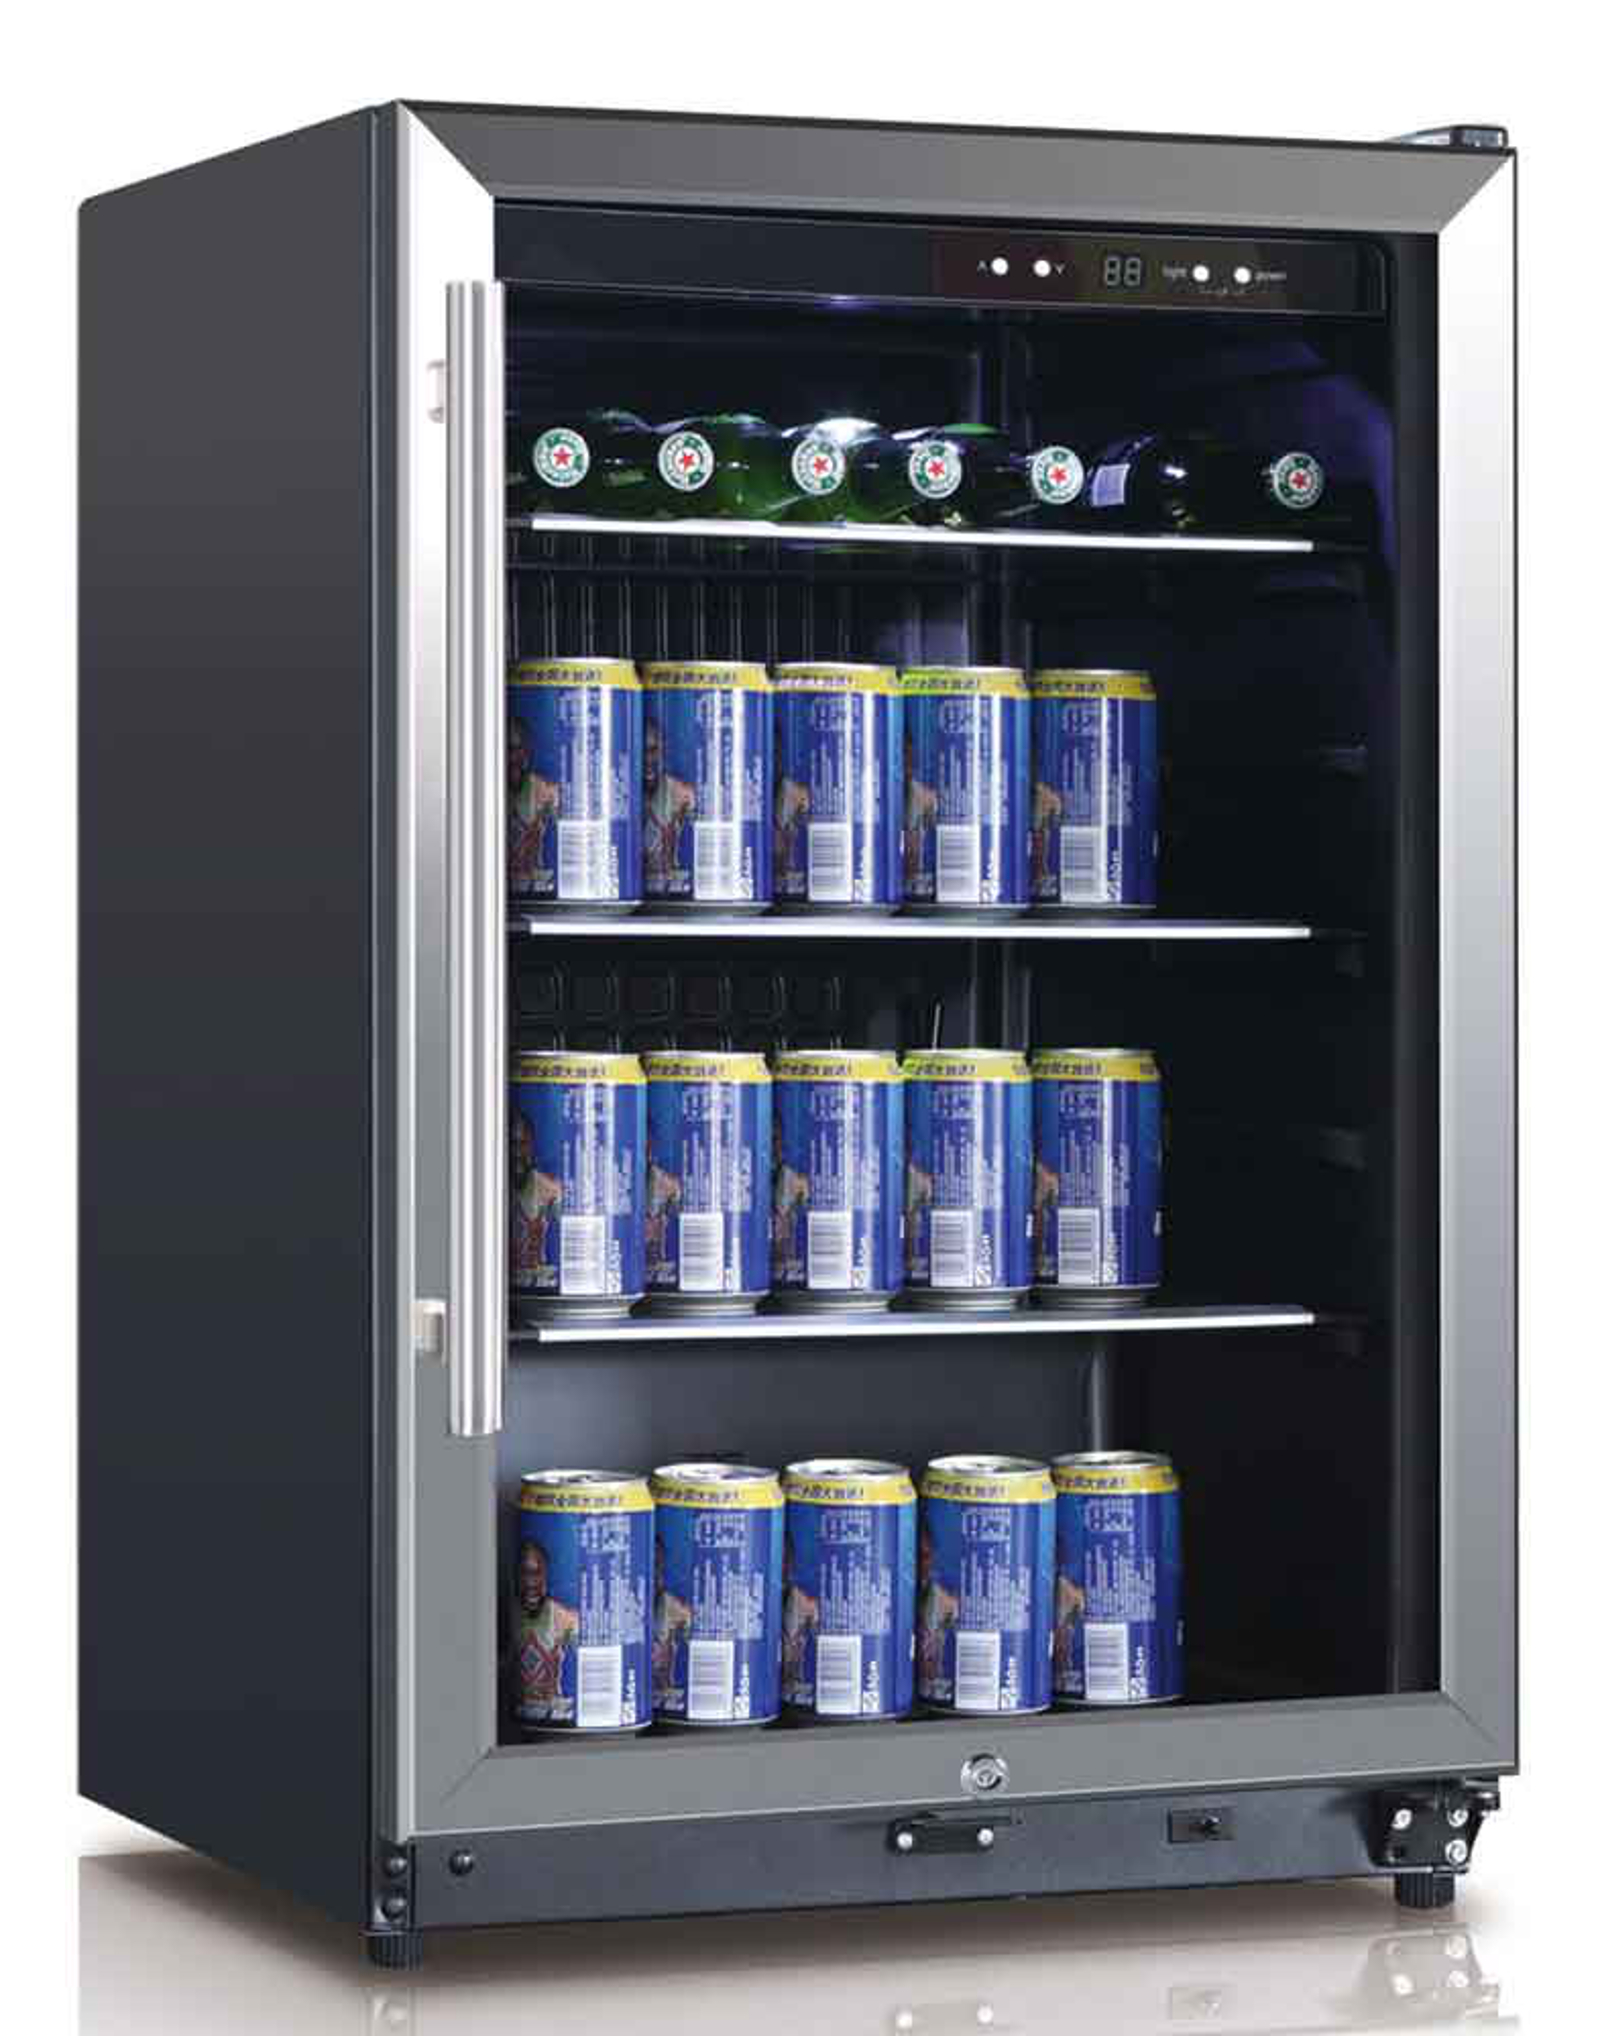 Equator CH 169-138 4.6 cu. ft. Can Cooler with 138 Can Capacity